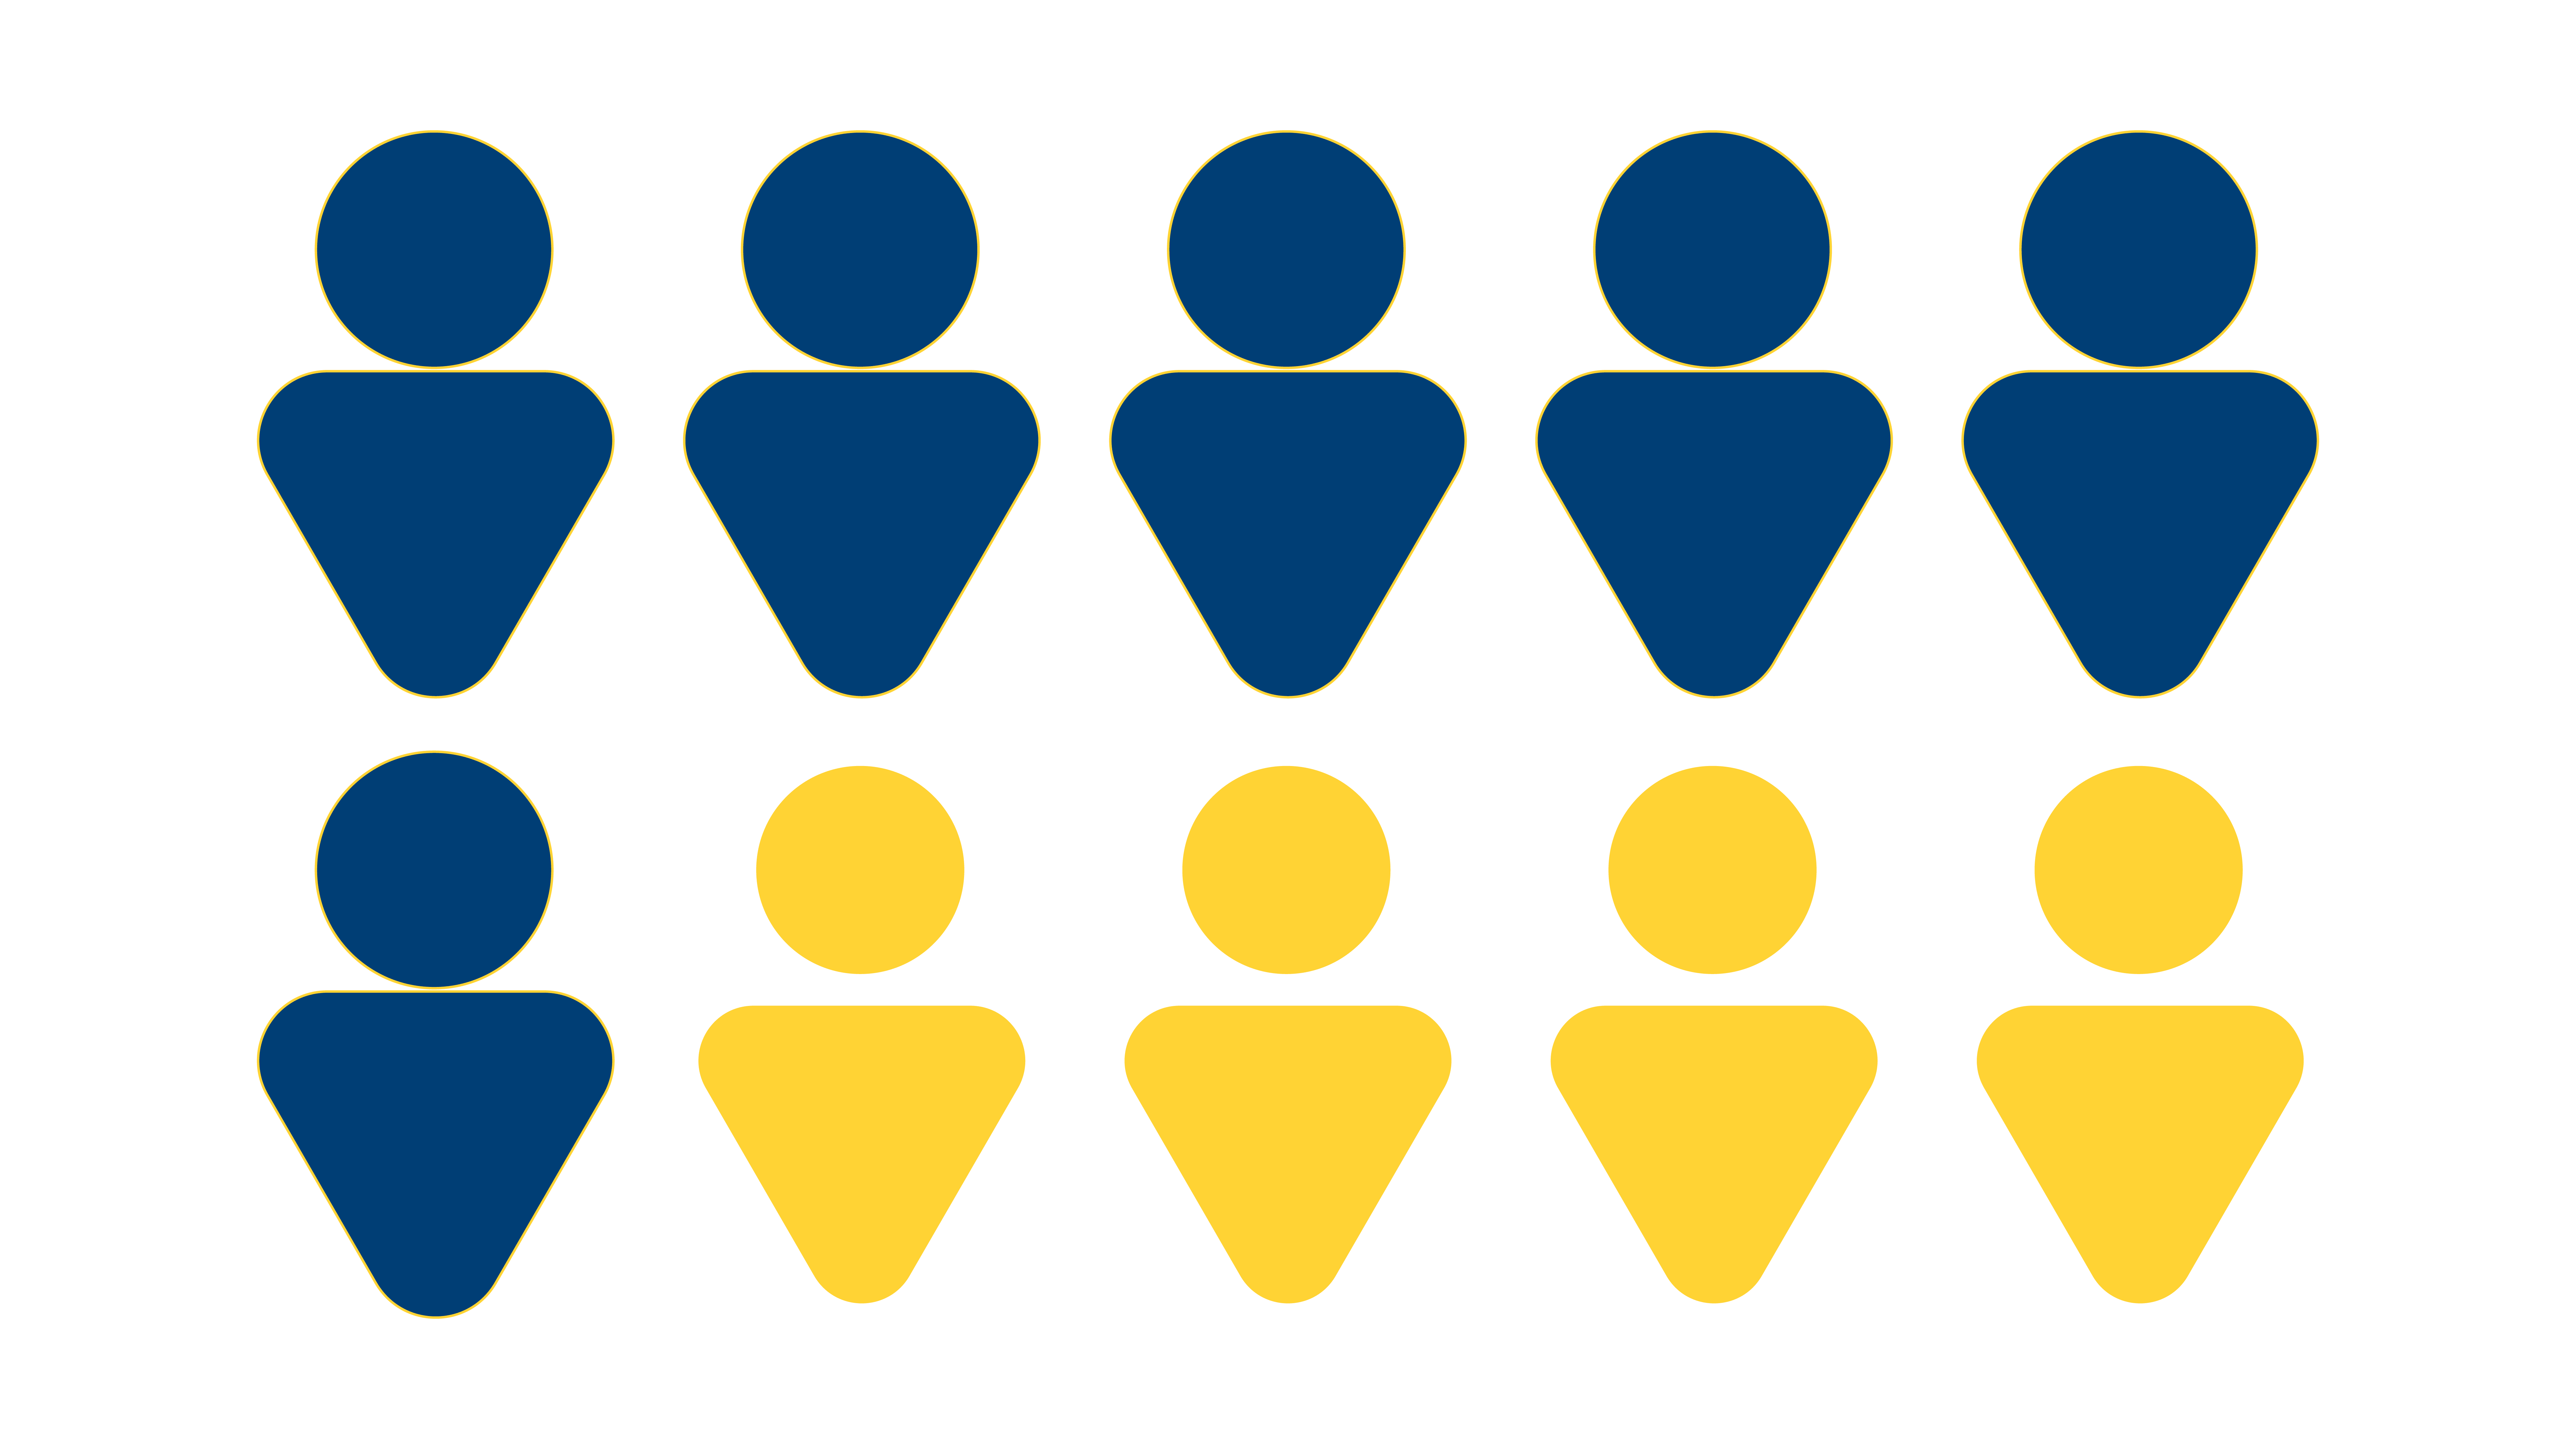 Graphic shows 10 person icons, representing 10 families. 6 of them are blue and 4 of them are yellow, showing that 6 out of 10 families believe their child generally feels safe at school